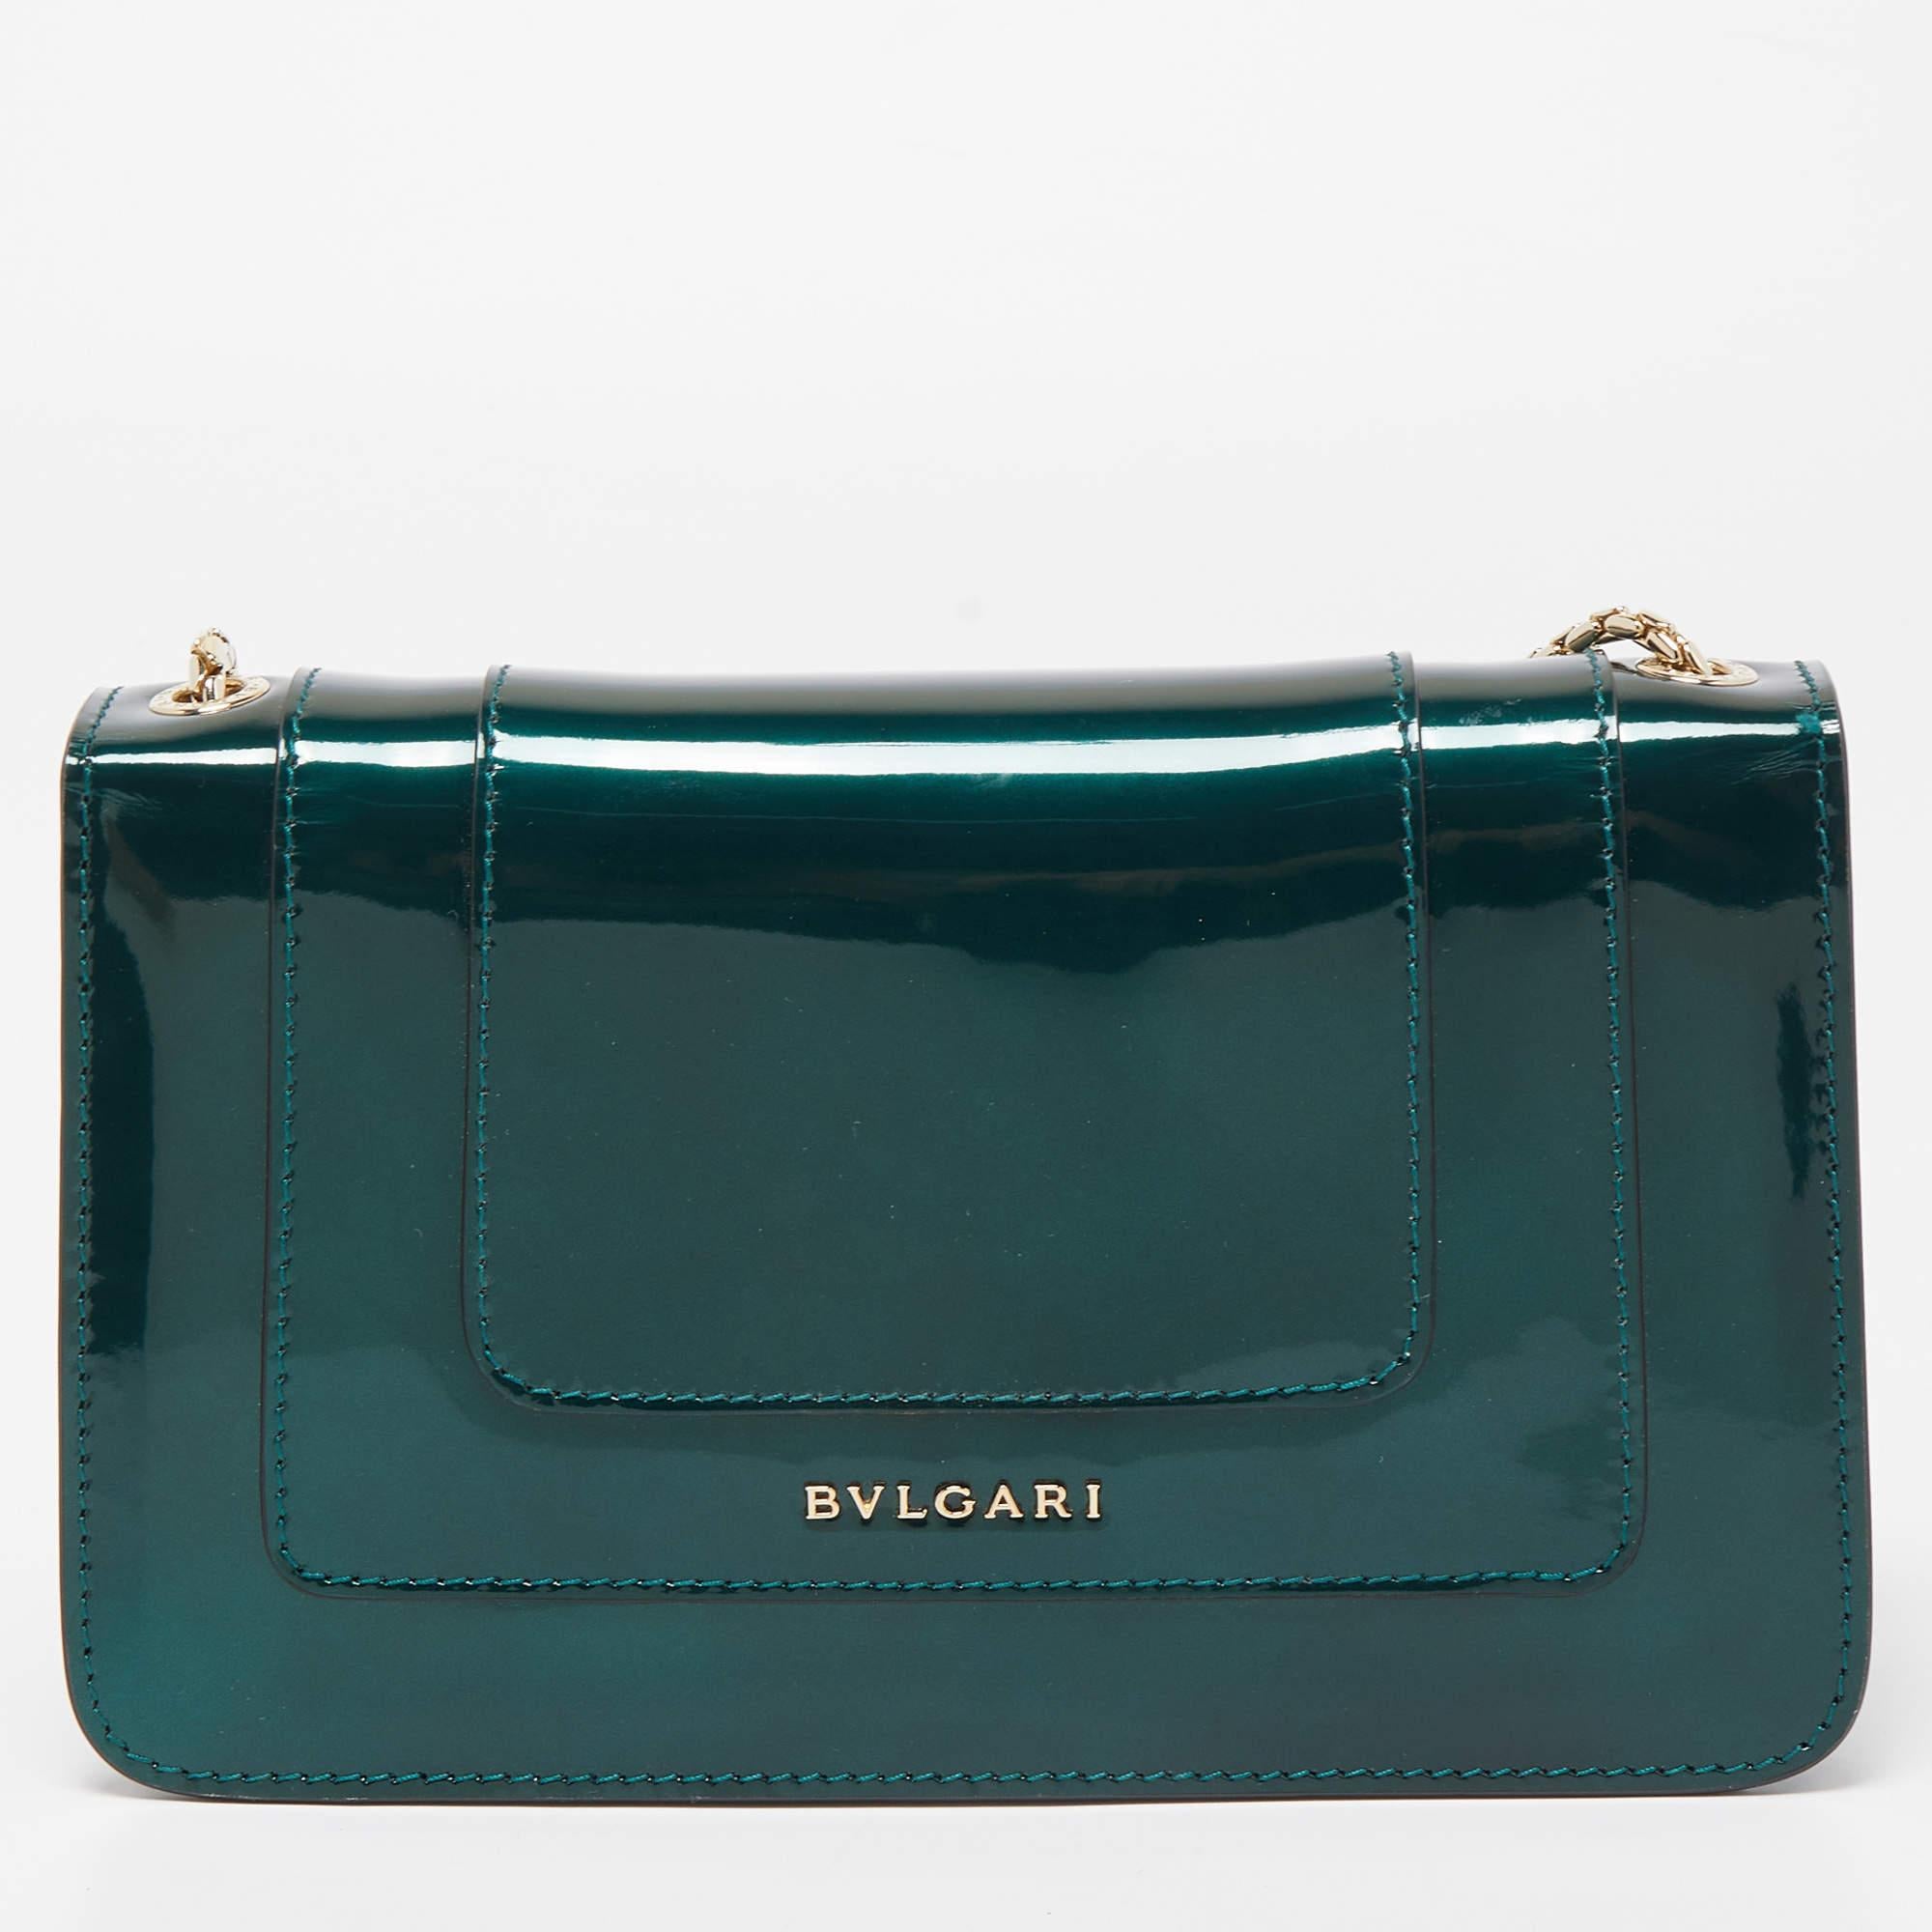 Dazzle the eyes that fall on you when you swing this stunning Bvlgari creation. Crafted from patent leather, the shoulder bag is styled with a flap that has the iconic Serpenti head closure. The bag has a spacious interior and a gorgeous gold-tone